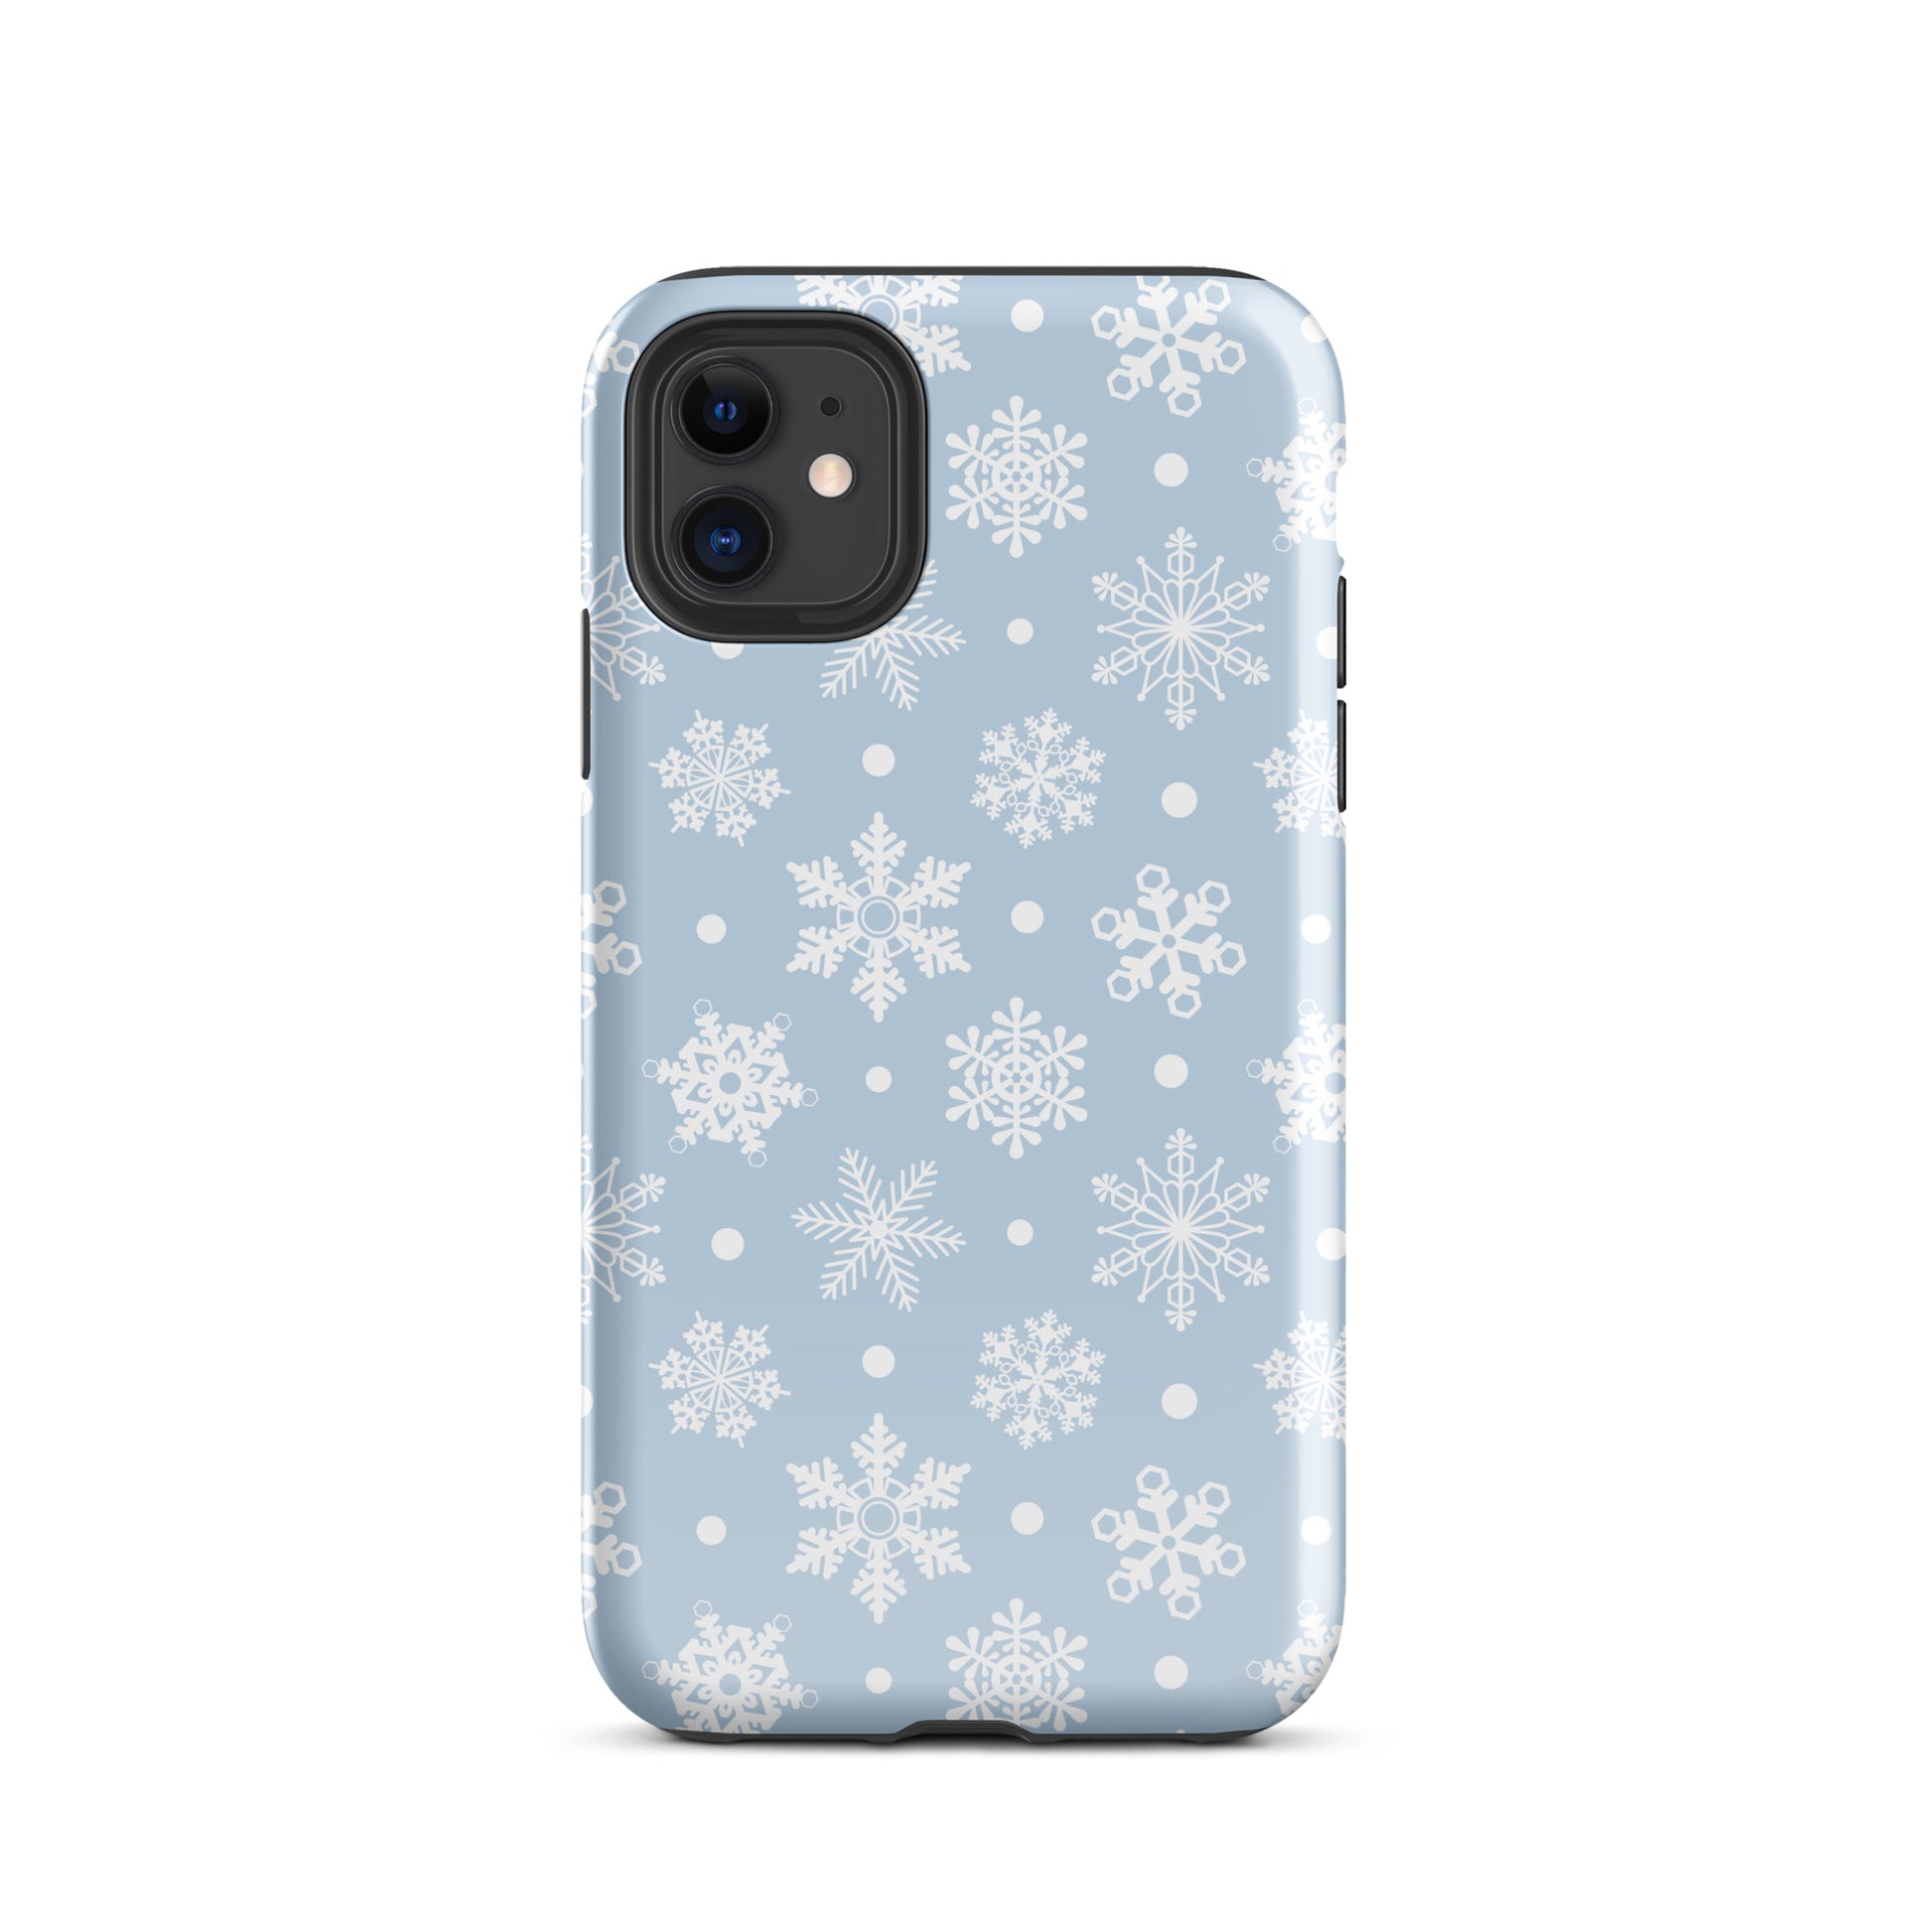 Snowflakes iPhone Case iPhone 11 Glossy